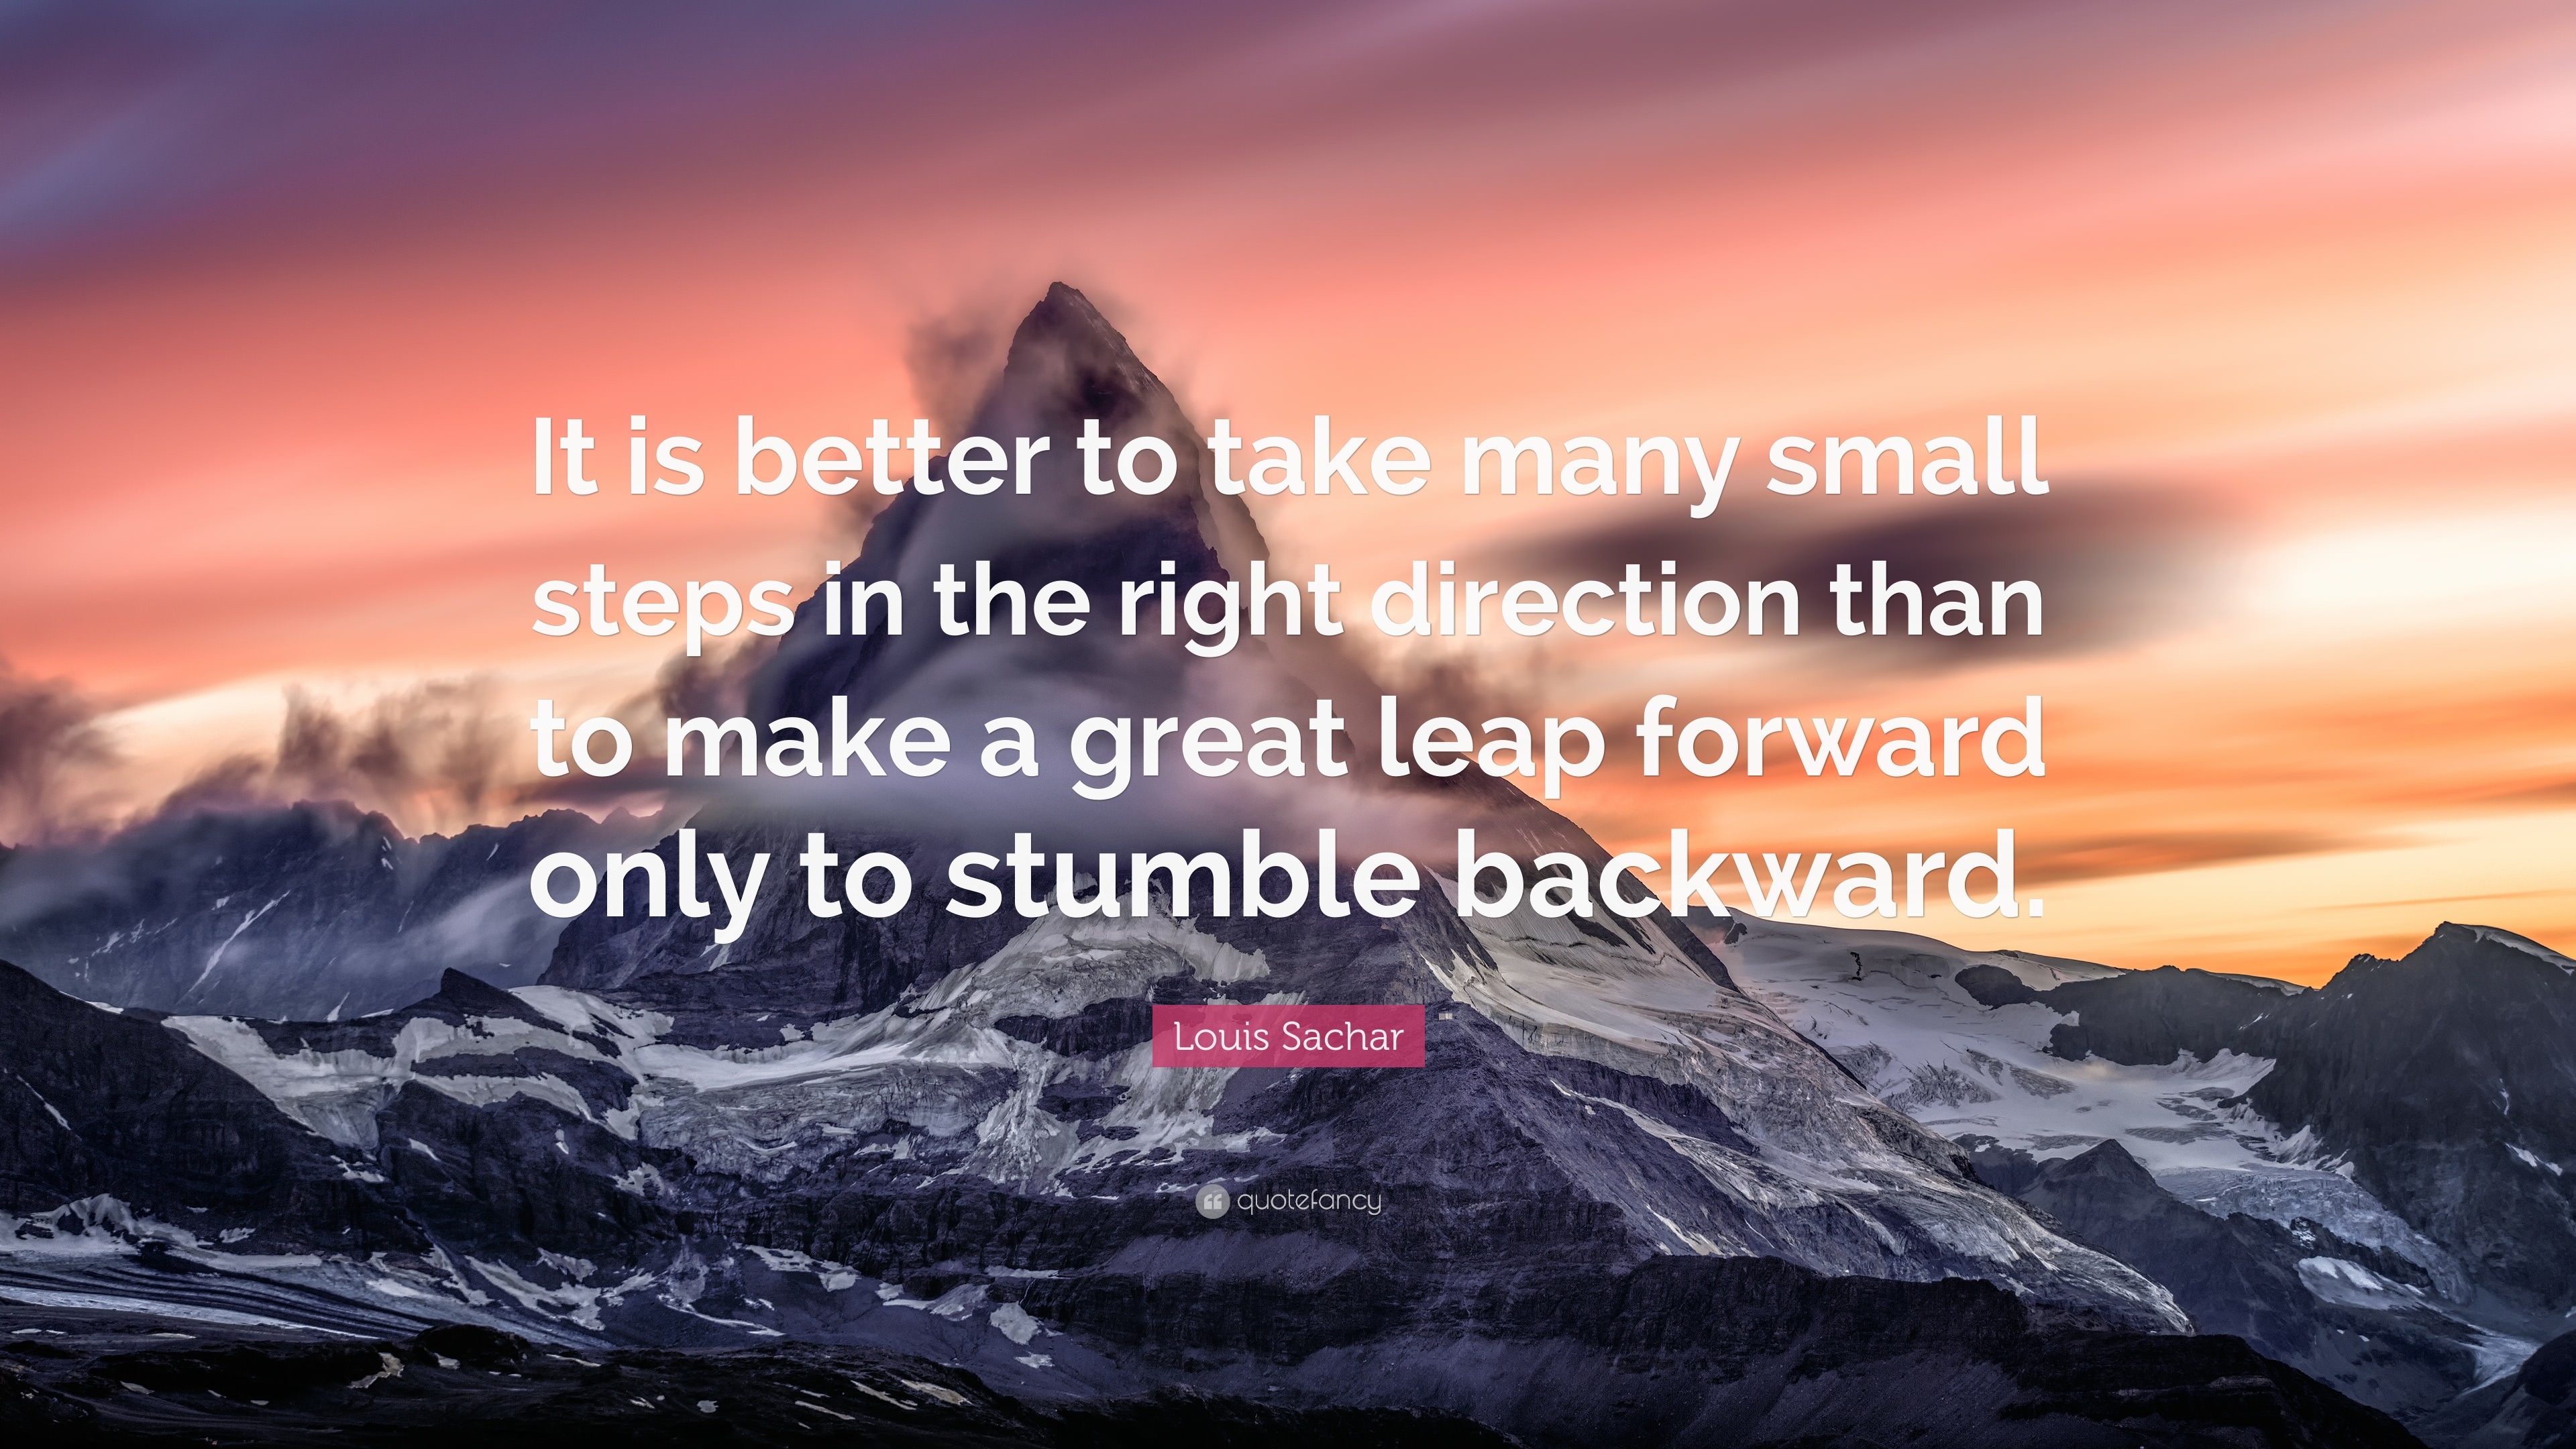 Mutual Ground - “It is better to take many small steps in the right  direction than to make a great leap forward only to stumble backward.” ~ Louis  Sachar #MondayMotivation